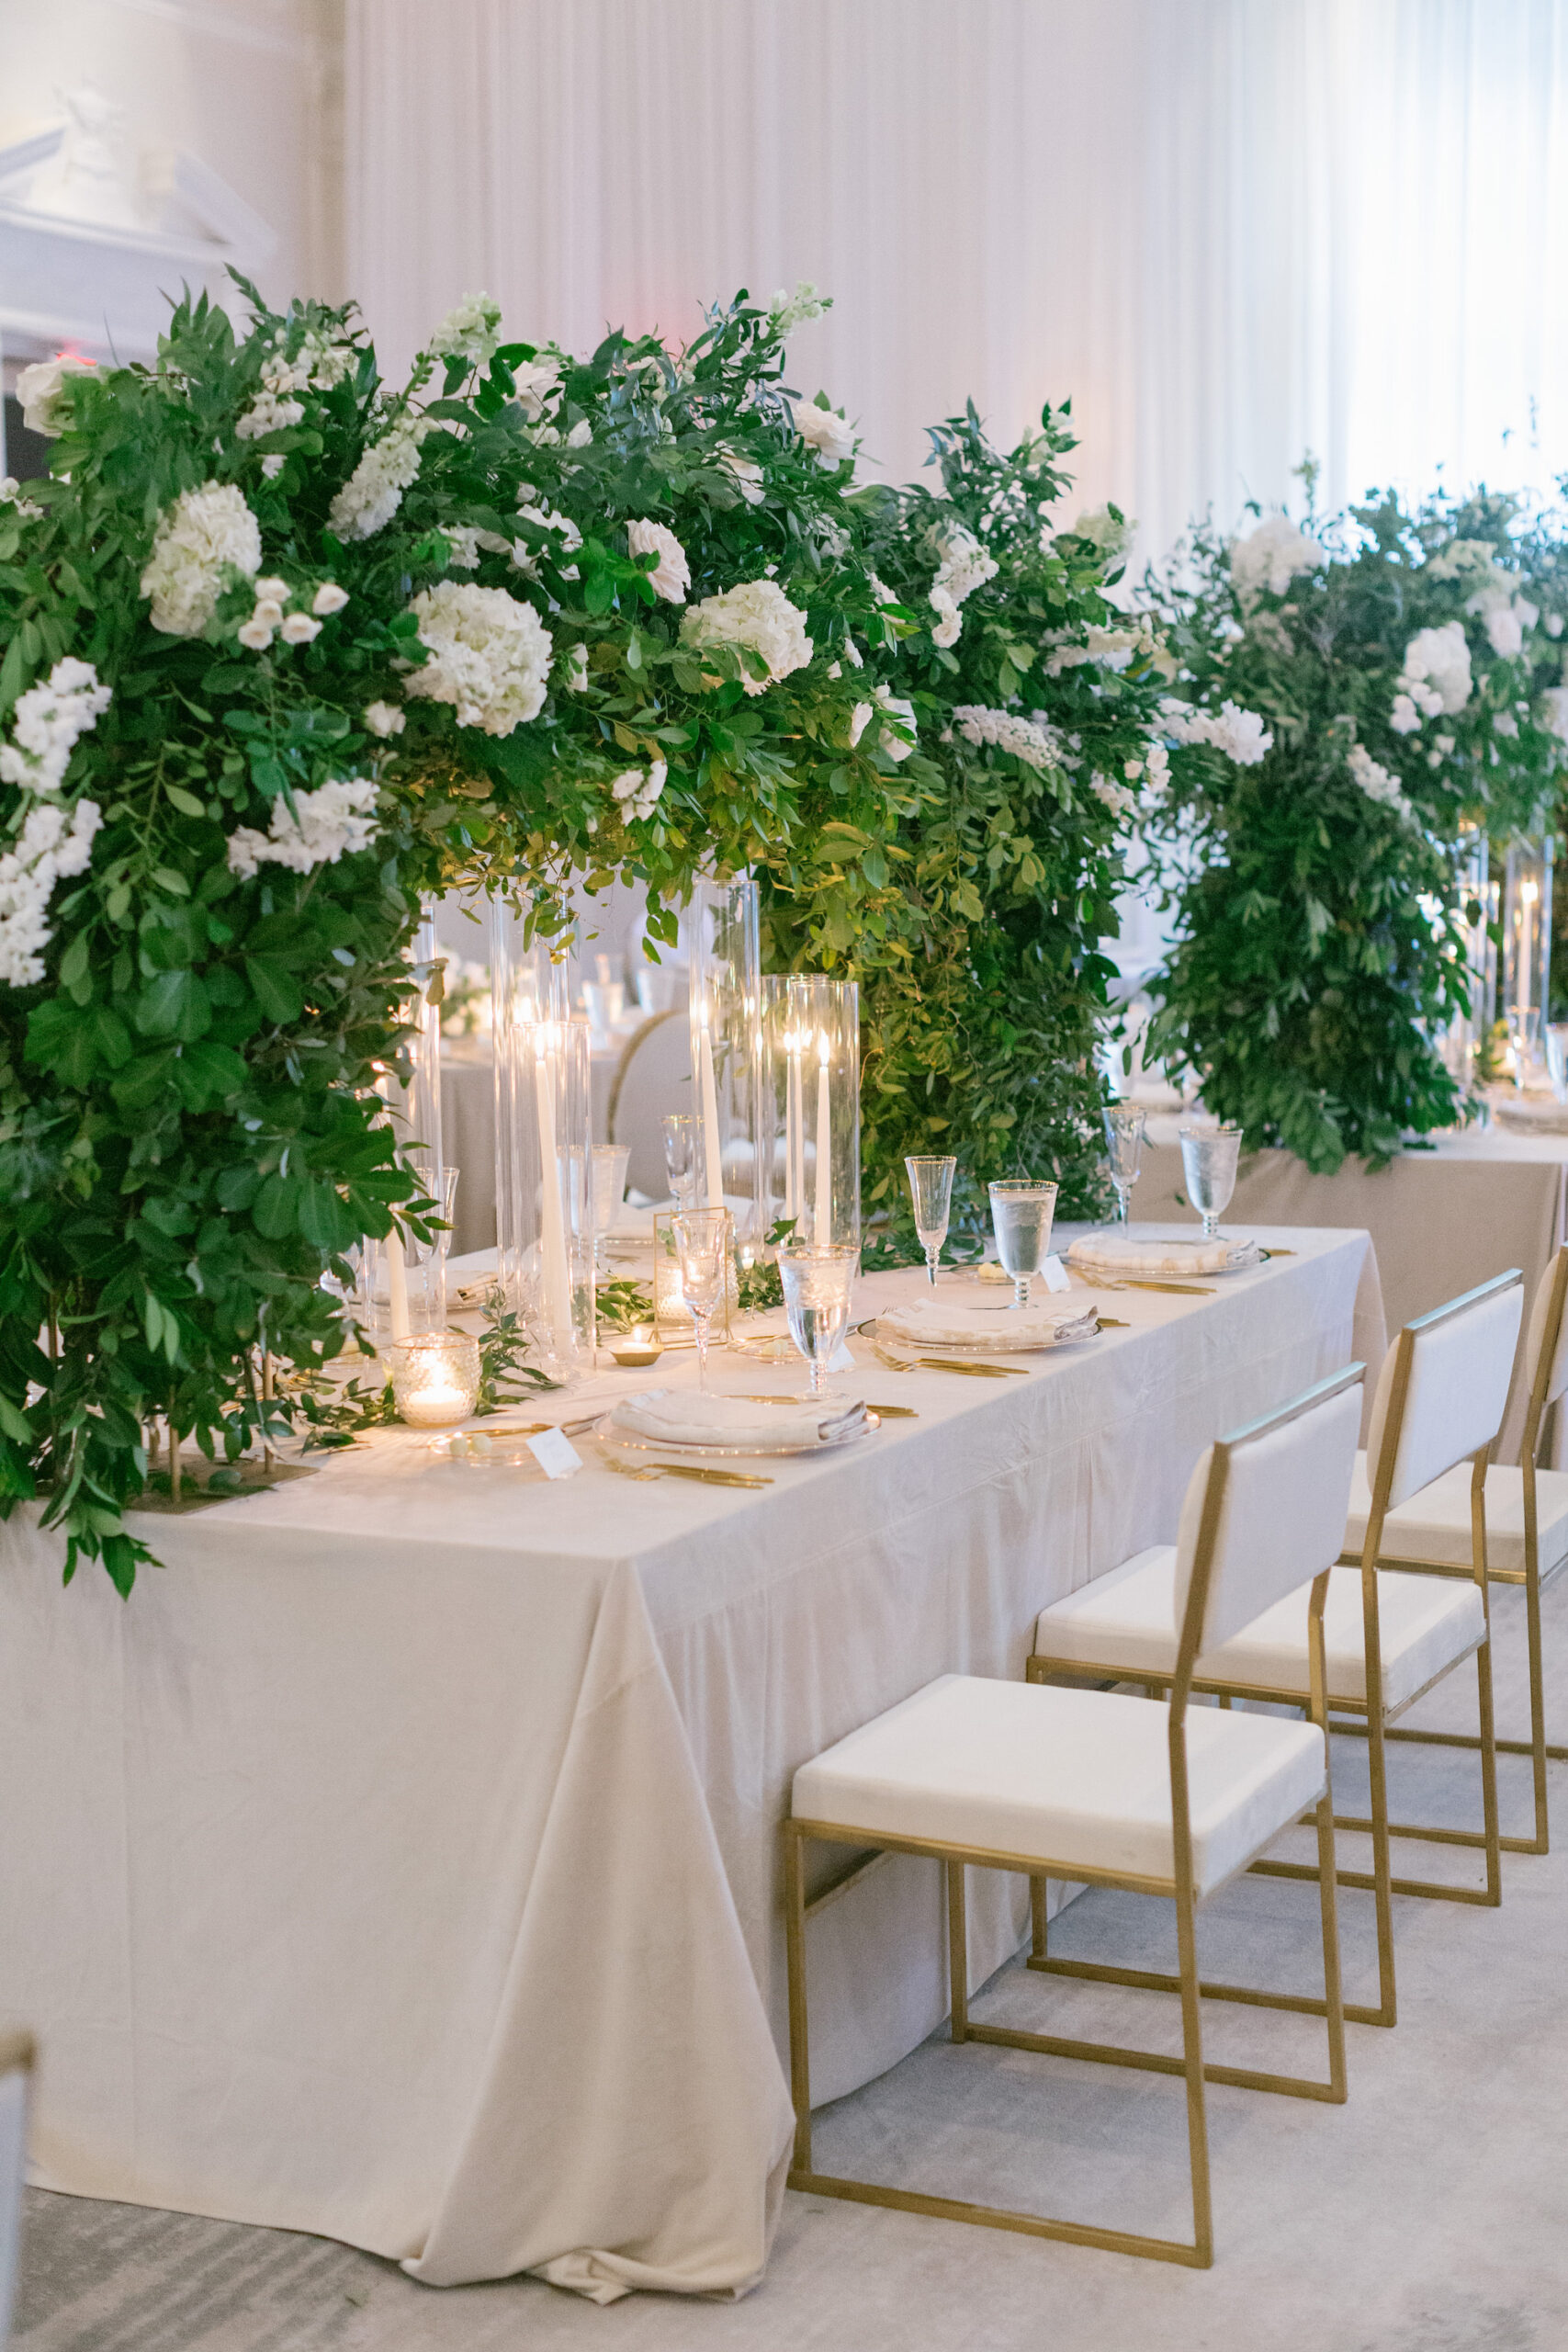 Luxurious Ballroom Wedding Reception Ideas | Modern White and Gold Chair Satin Inspiration | Tabletop Arch White Flowers with Greenery Centerpiece Inspiration | Hurricane Taper Candle Holders | Tampa Bay Rental A Chair Affair | Over the Top Linen Rental